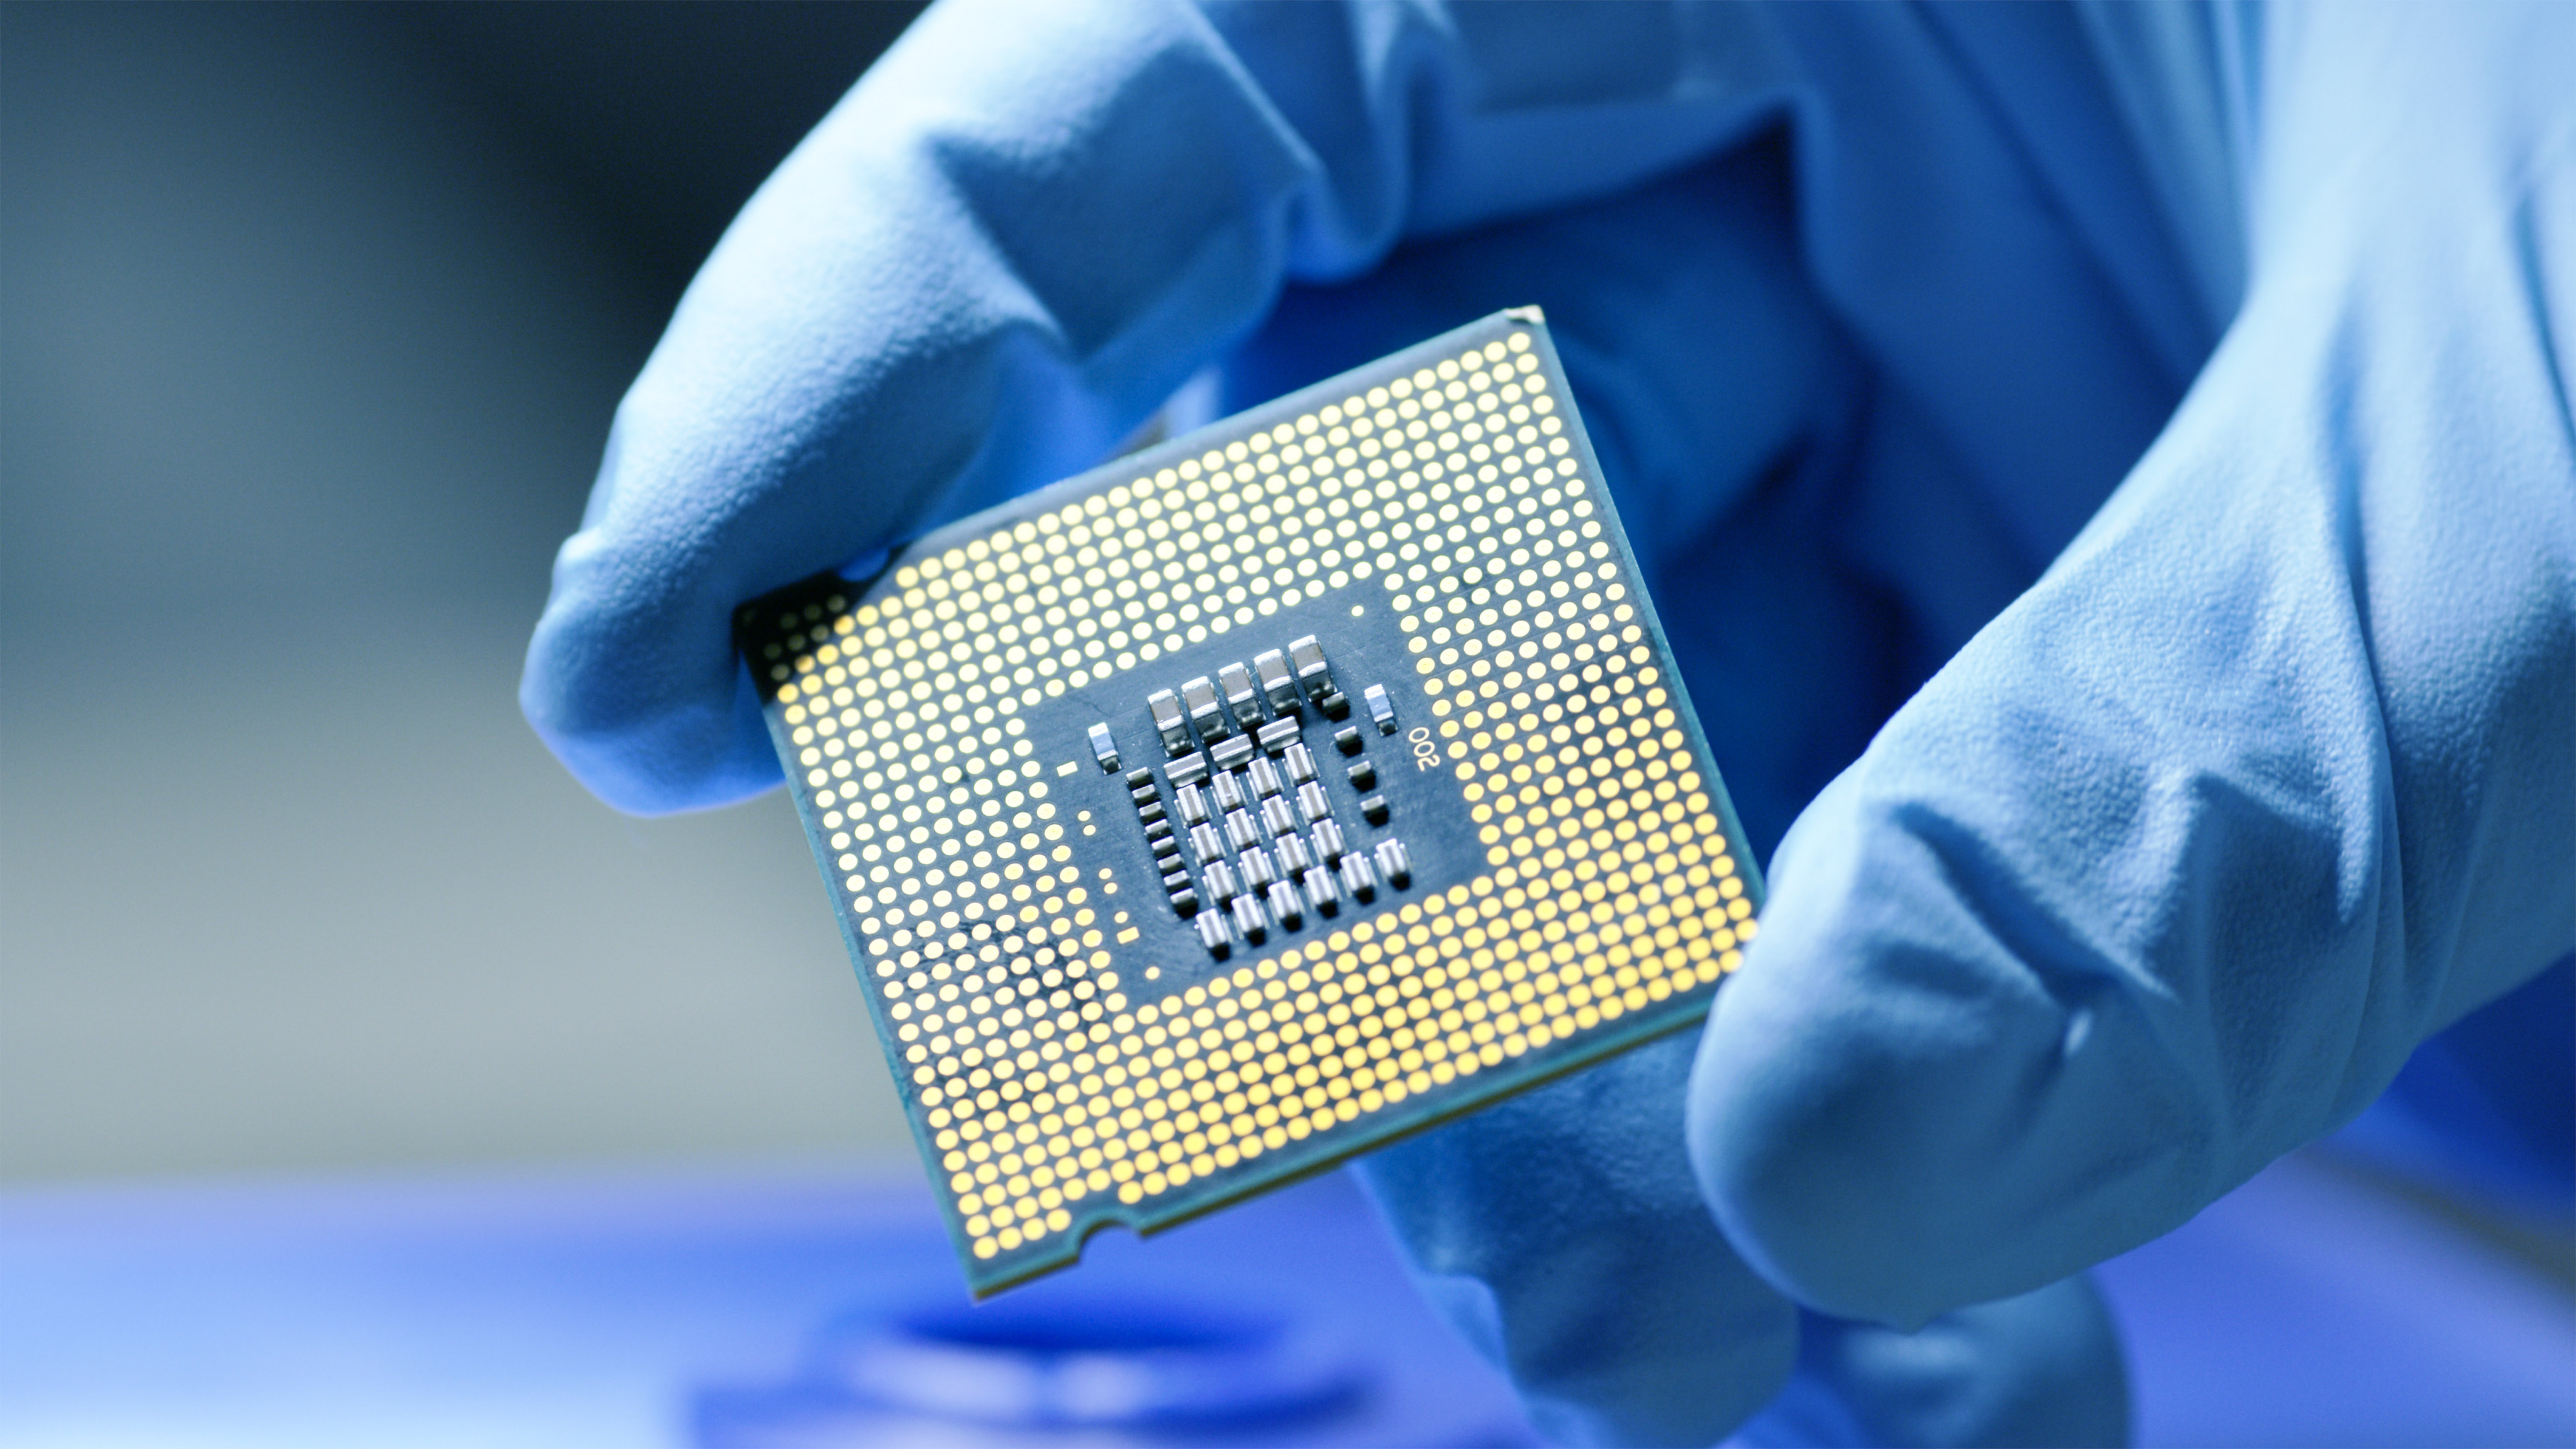 Semiconductor sales continued to grow globally in September as developers of consumer electronics bought chips made for generative AI applications, analysts said. Photo: Shutterstock